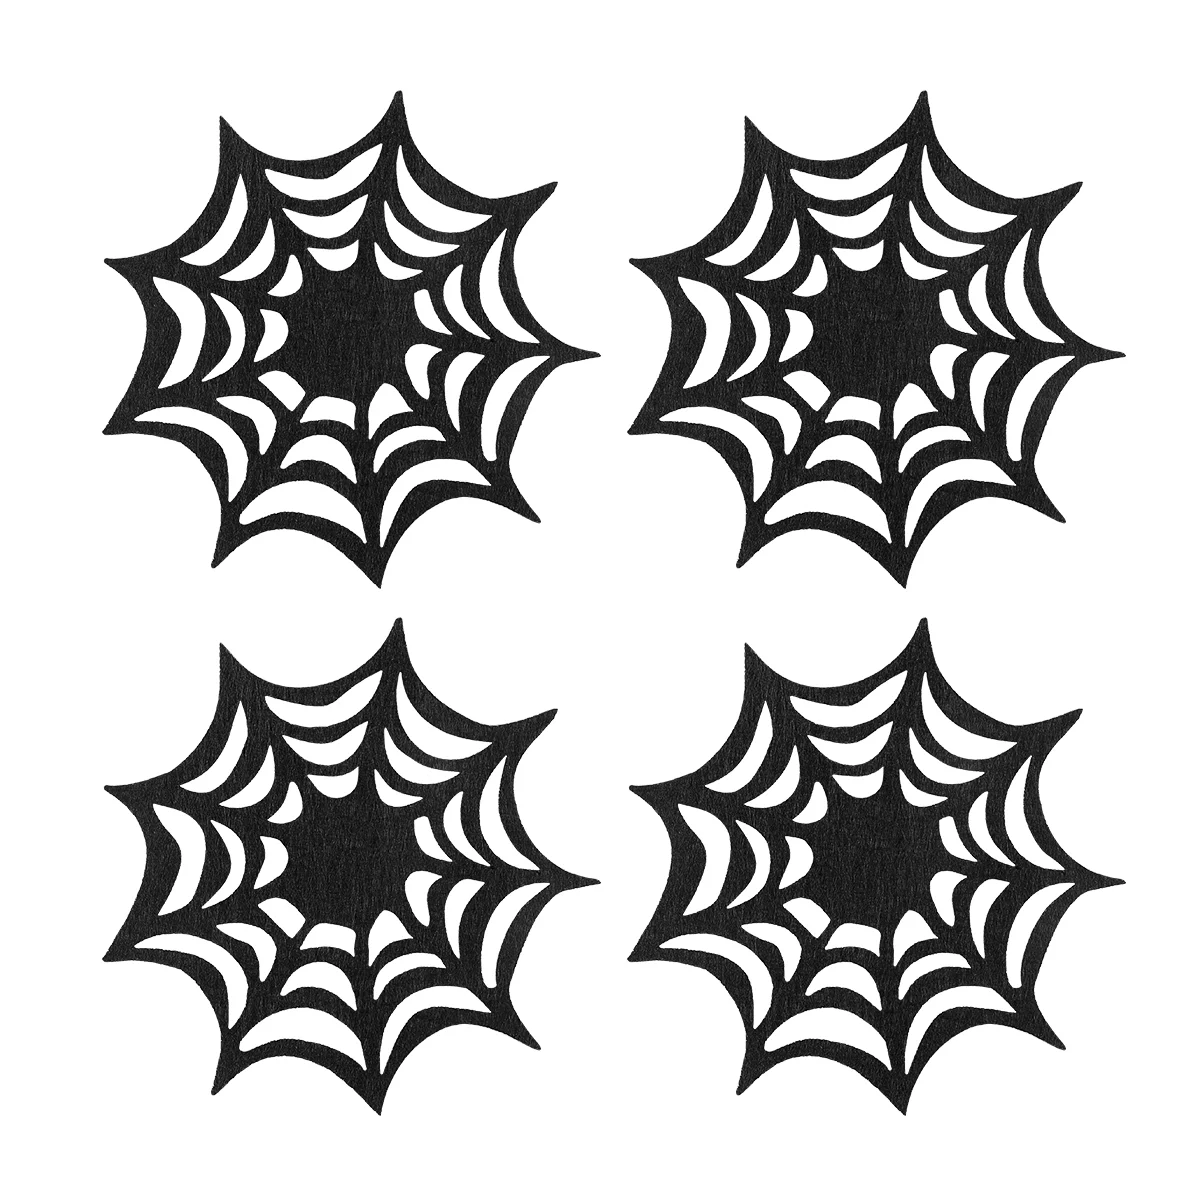 

Coasters Spider Placemats Web Table Coaster Black Placemat Doilies Kitchen Decor Cobweb Gothic Drink Withdrinks Spooky